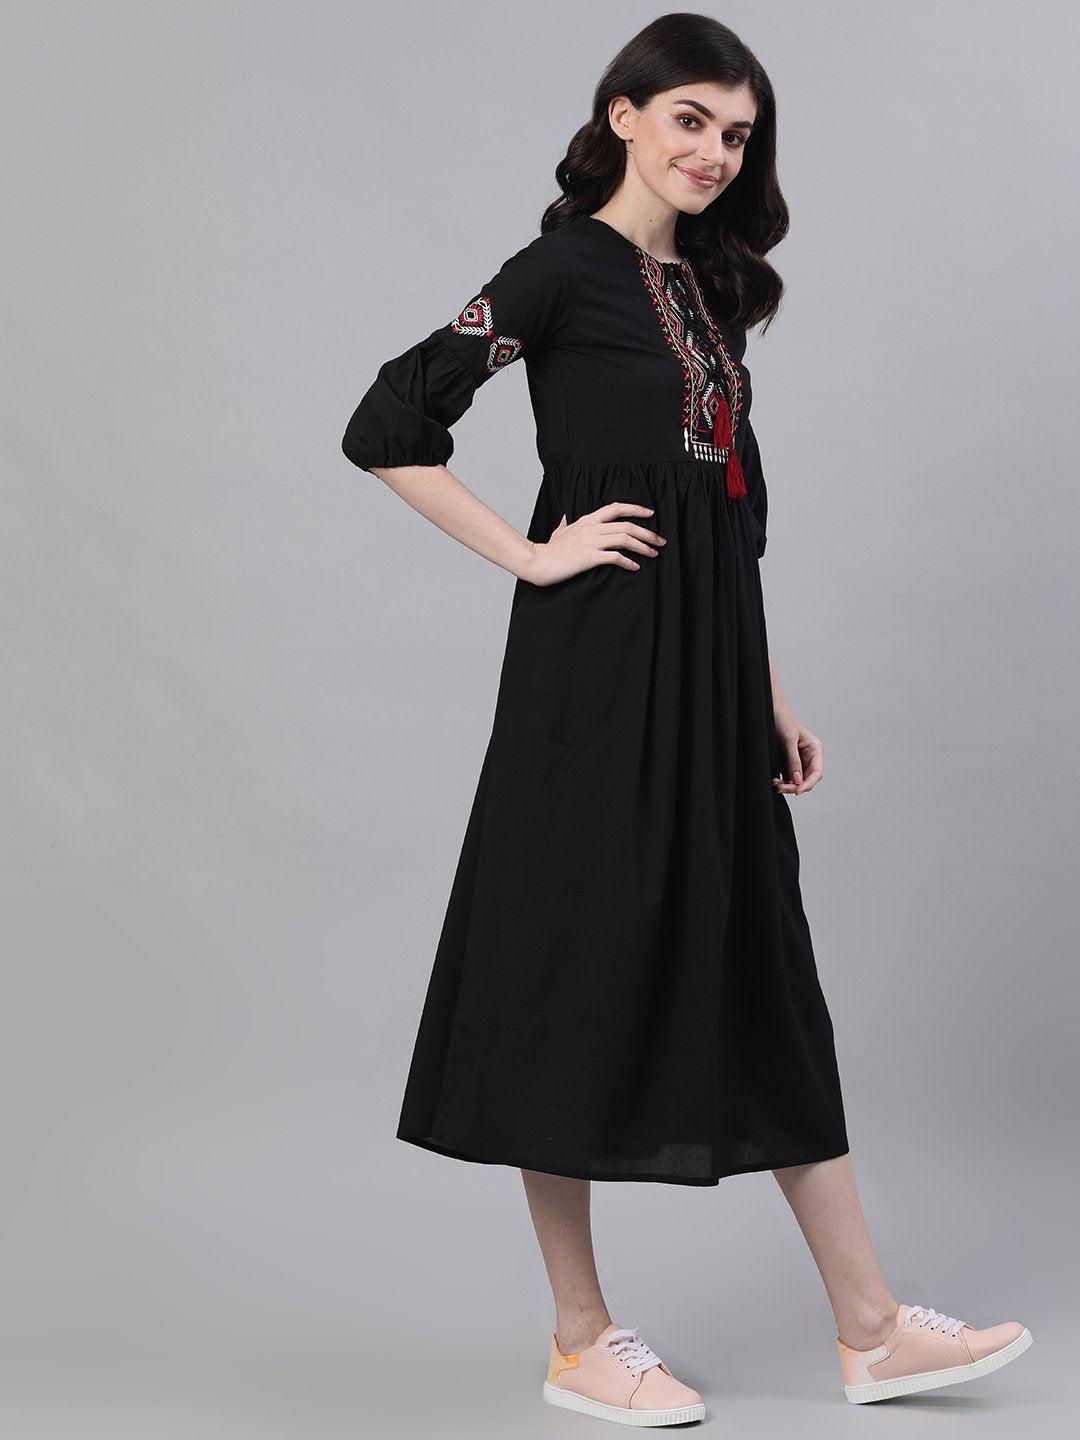 black-solid-tie-up-neck-fit-and-flare-dress-10804008BK, Women Clothing, Cotton Dress